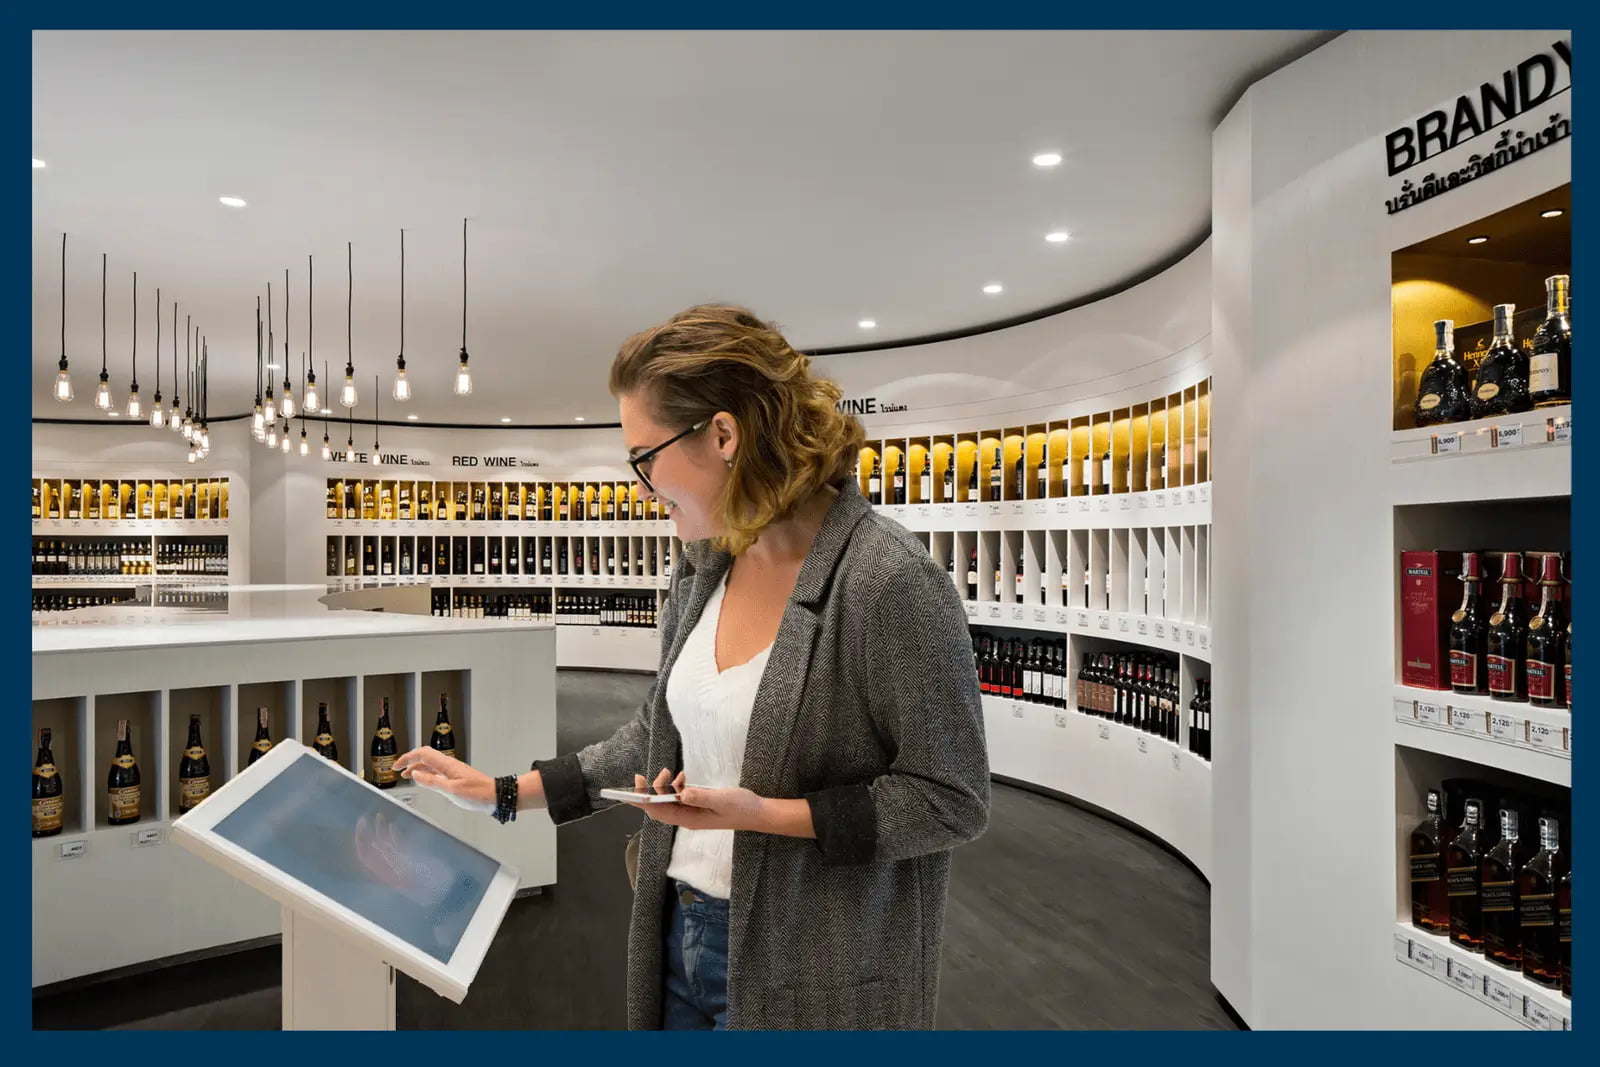 Person using Lightning POS system Kiosk in a wine store